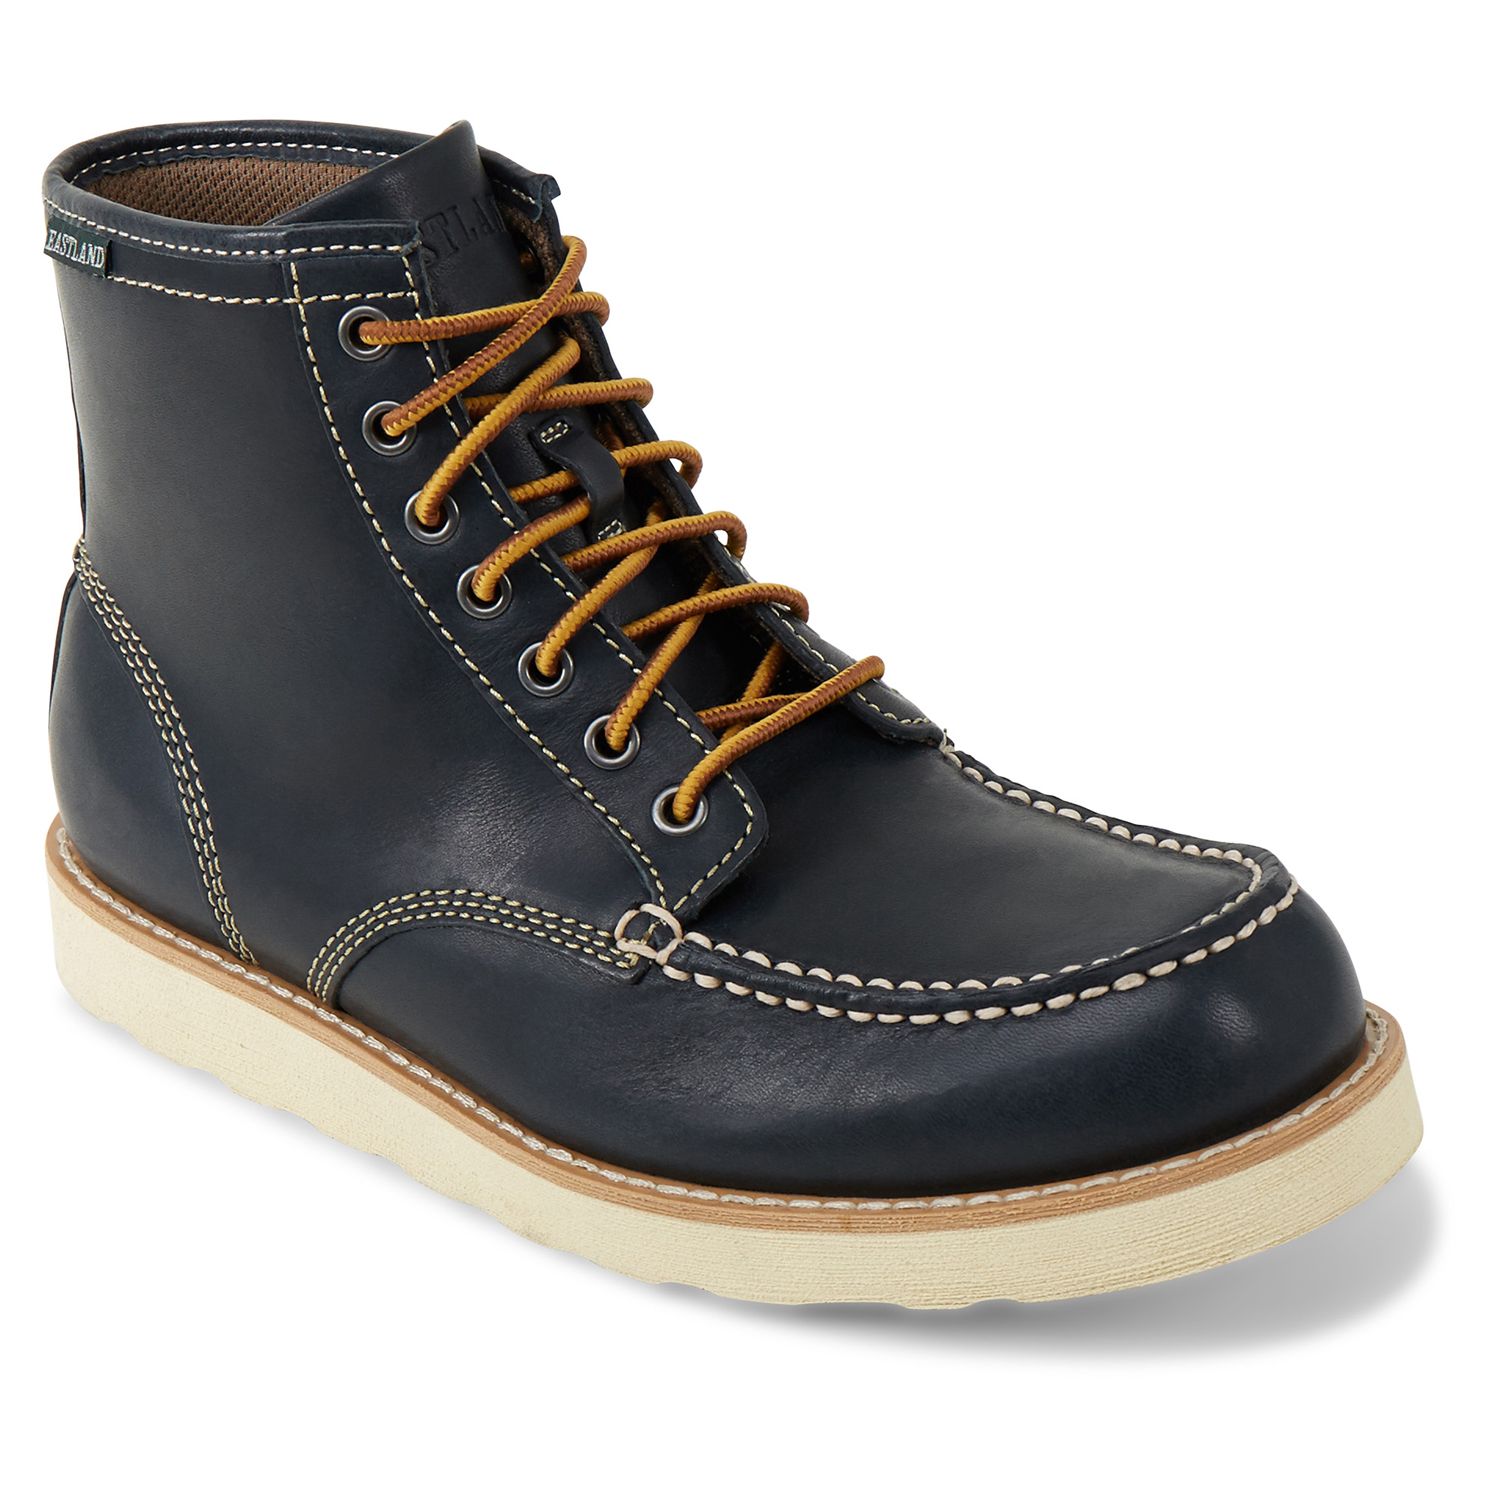 Image for Eastland Lumber Up Men's Ankle Boots at Kohl's.